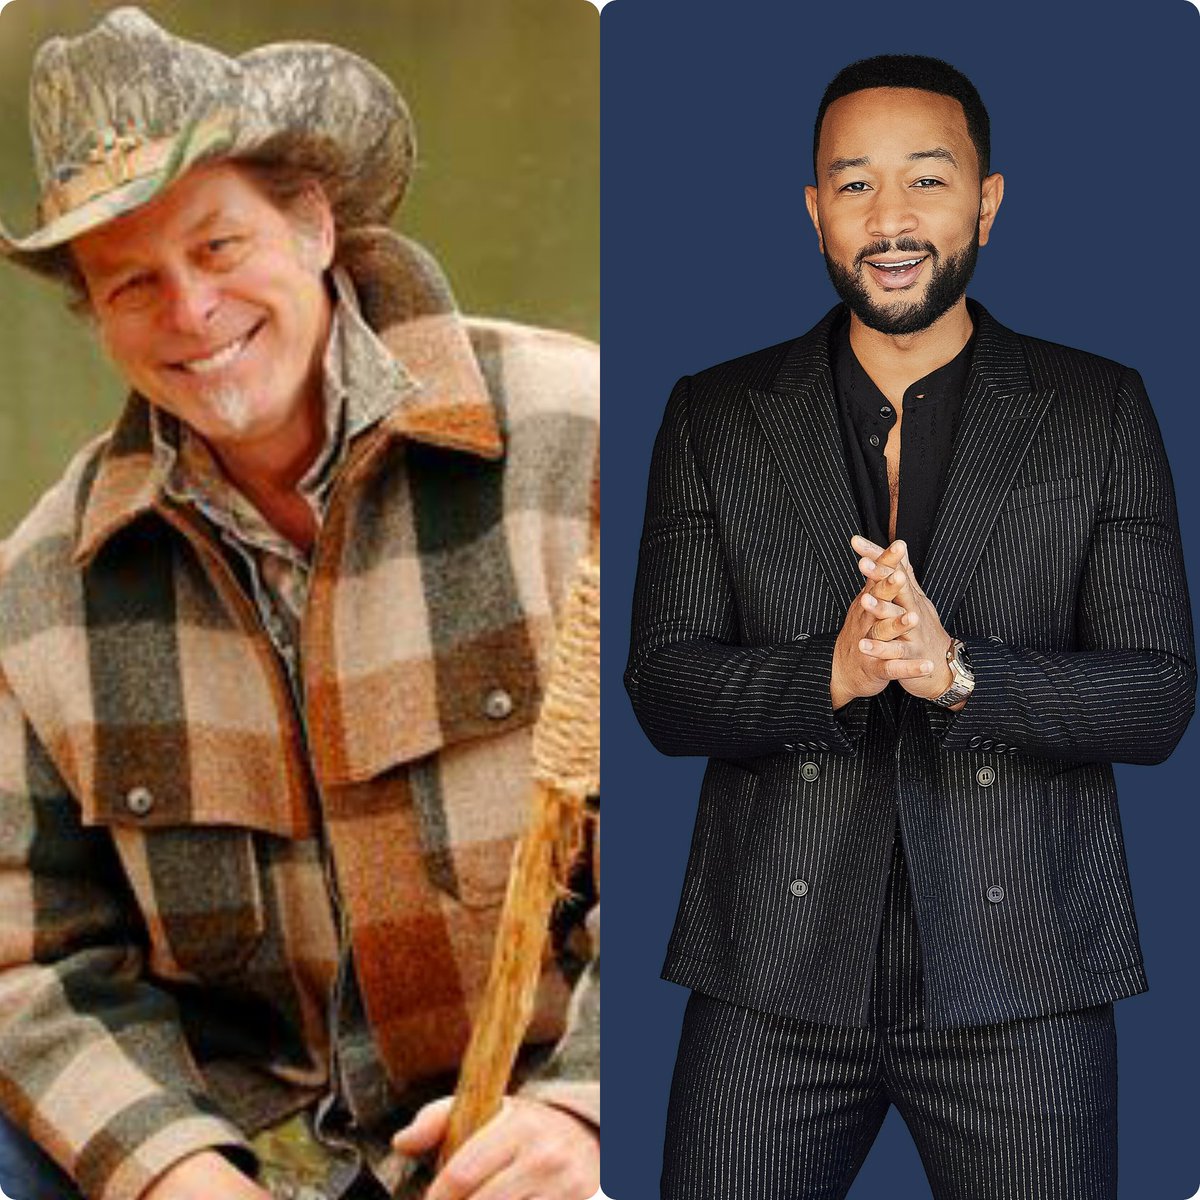 If known artists are going to be politically active,

who likes Ted Nugent's ideas over John Legend's?🙋🏼‍♀️